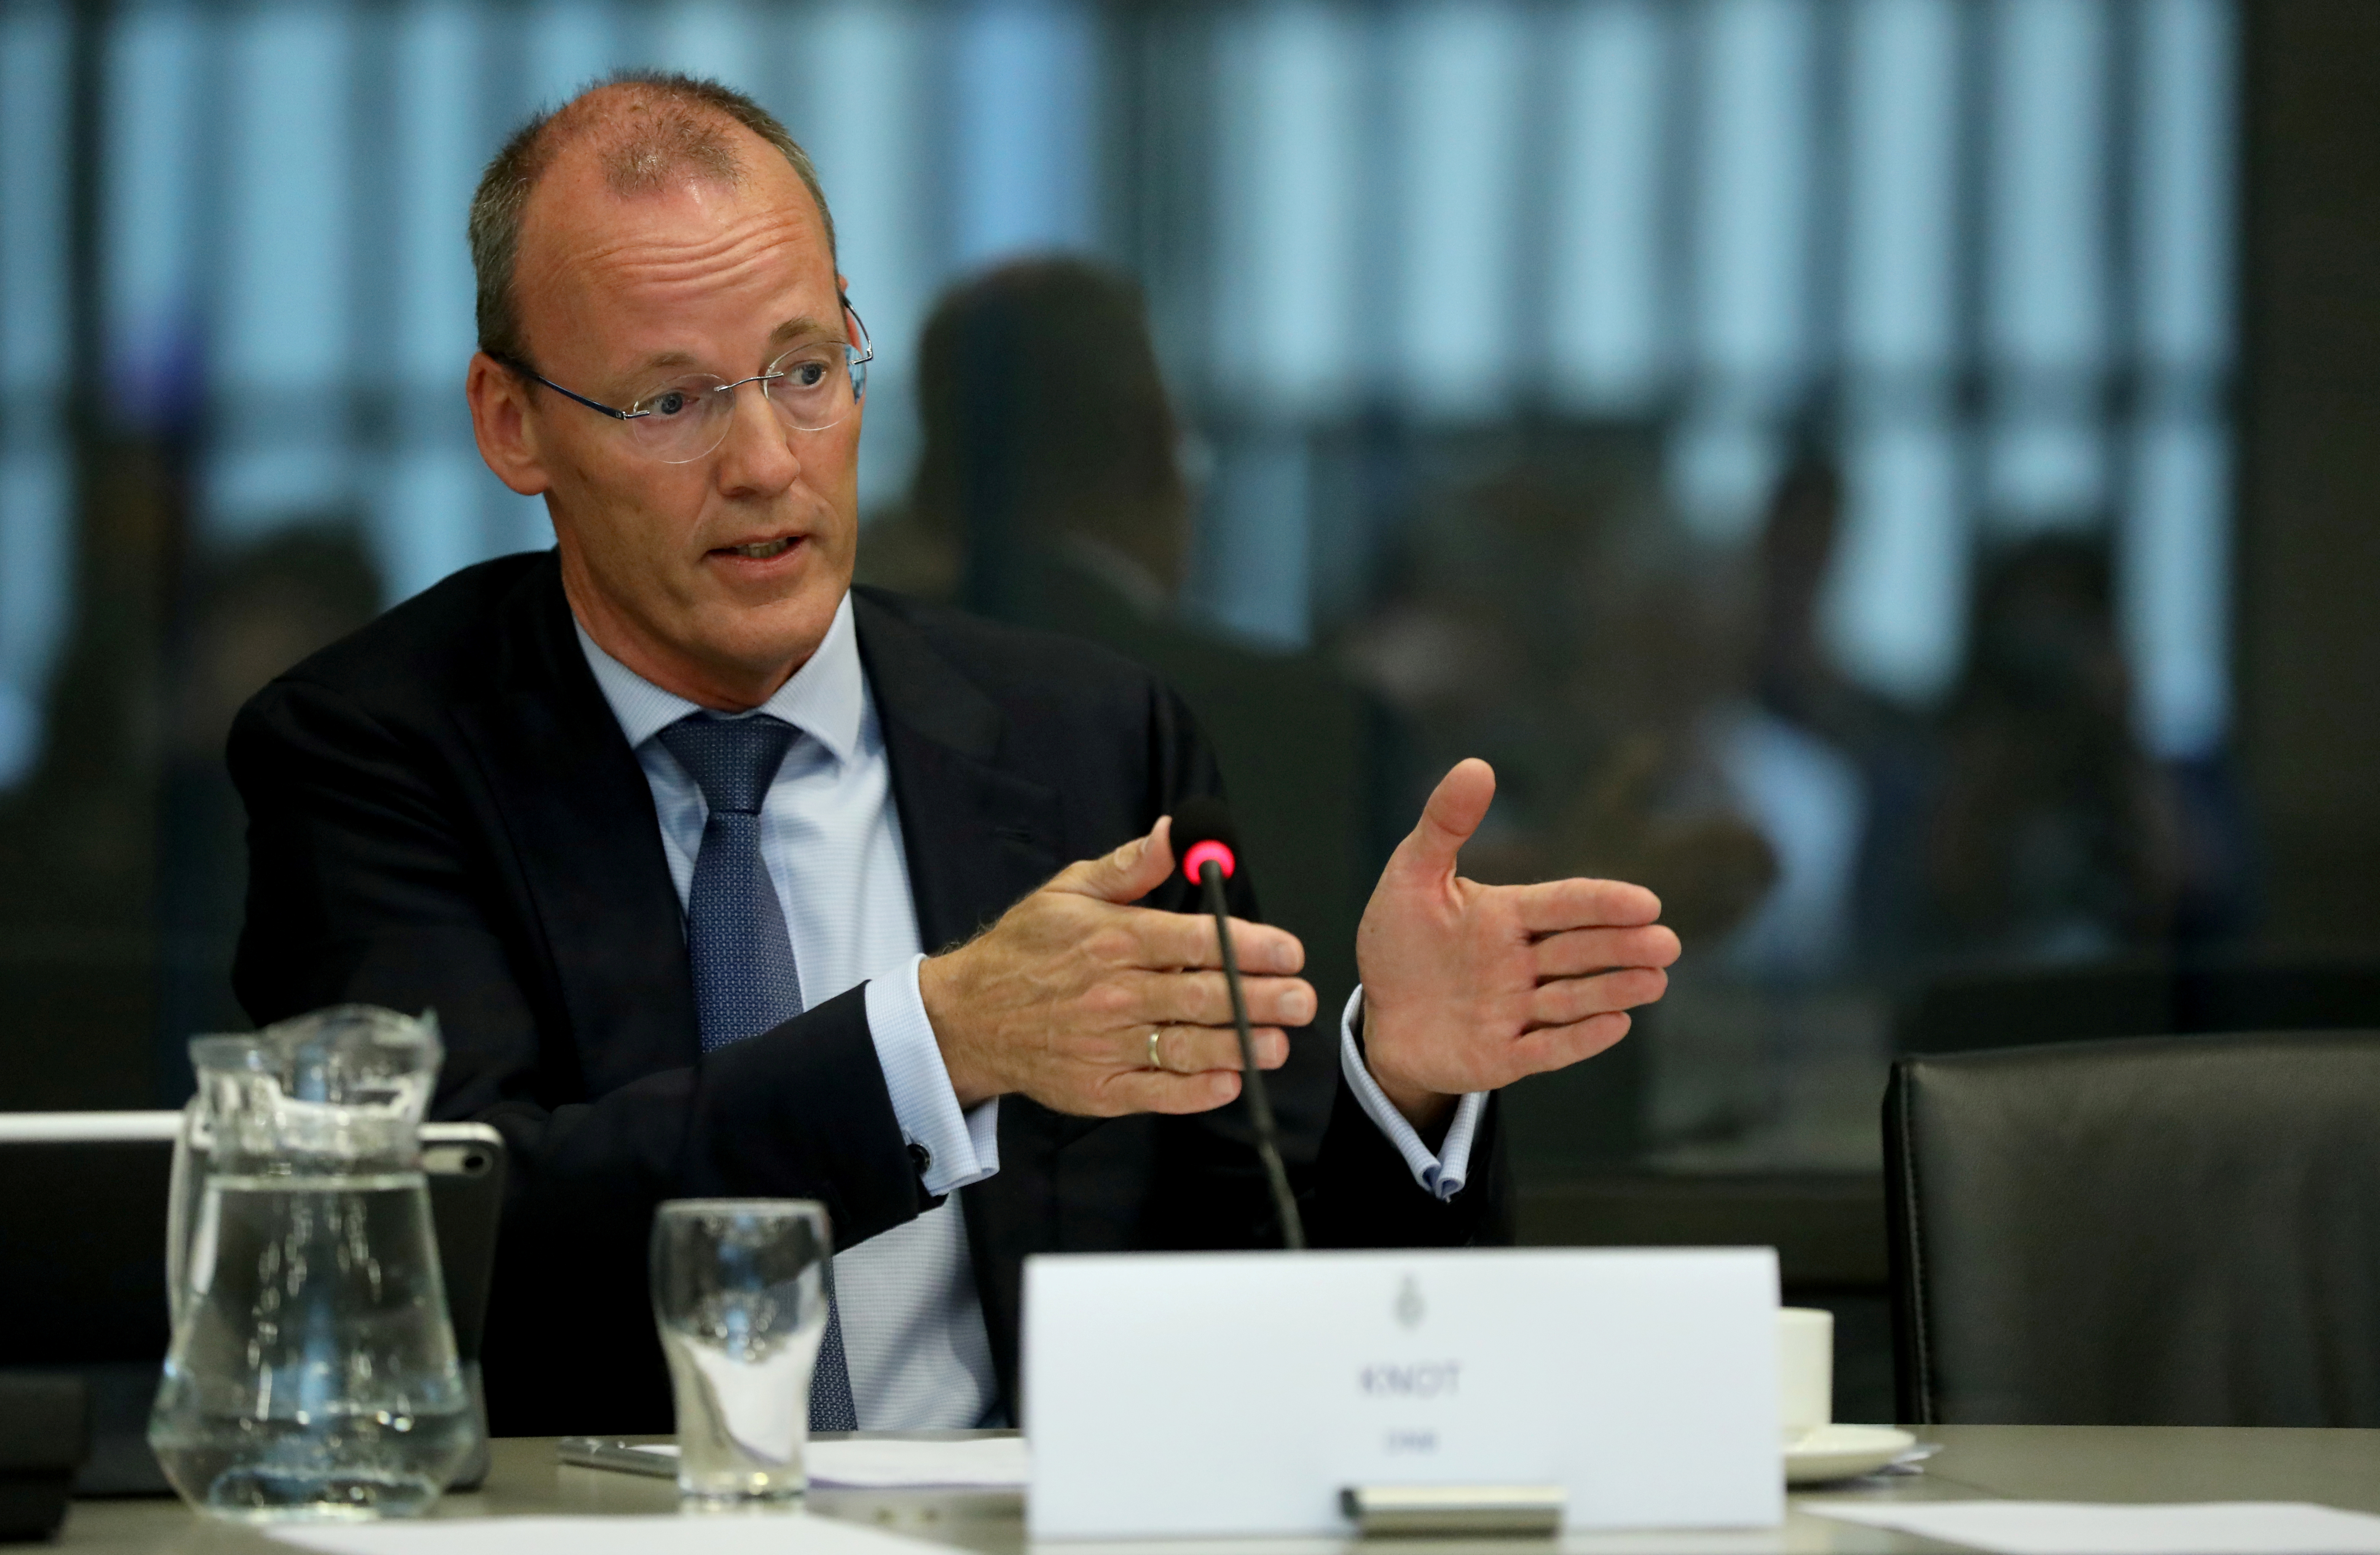 ECB board member Klaas Knot appears at a Dutch parliamentary hearing in The Hague